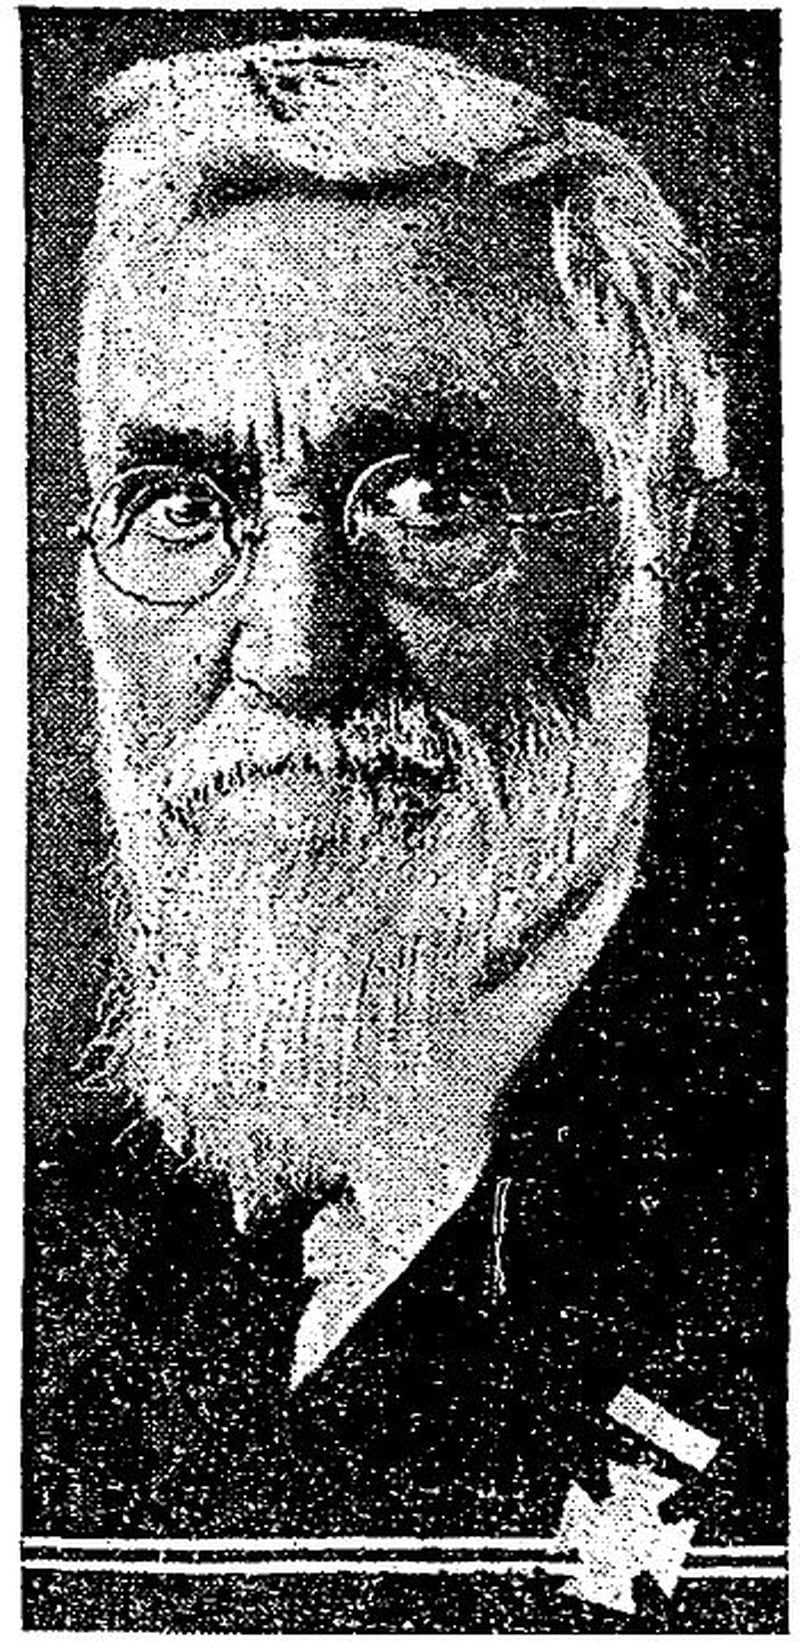 J. W. Mewborn of Ozark, Alabama is “credited by tradition with having started one of the hardest fought bloodless engagements of the civil war.” This photo of him as an older man is included in The Atlanta Constitution in 1922. (AJC Archives)